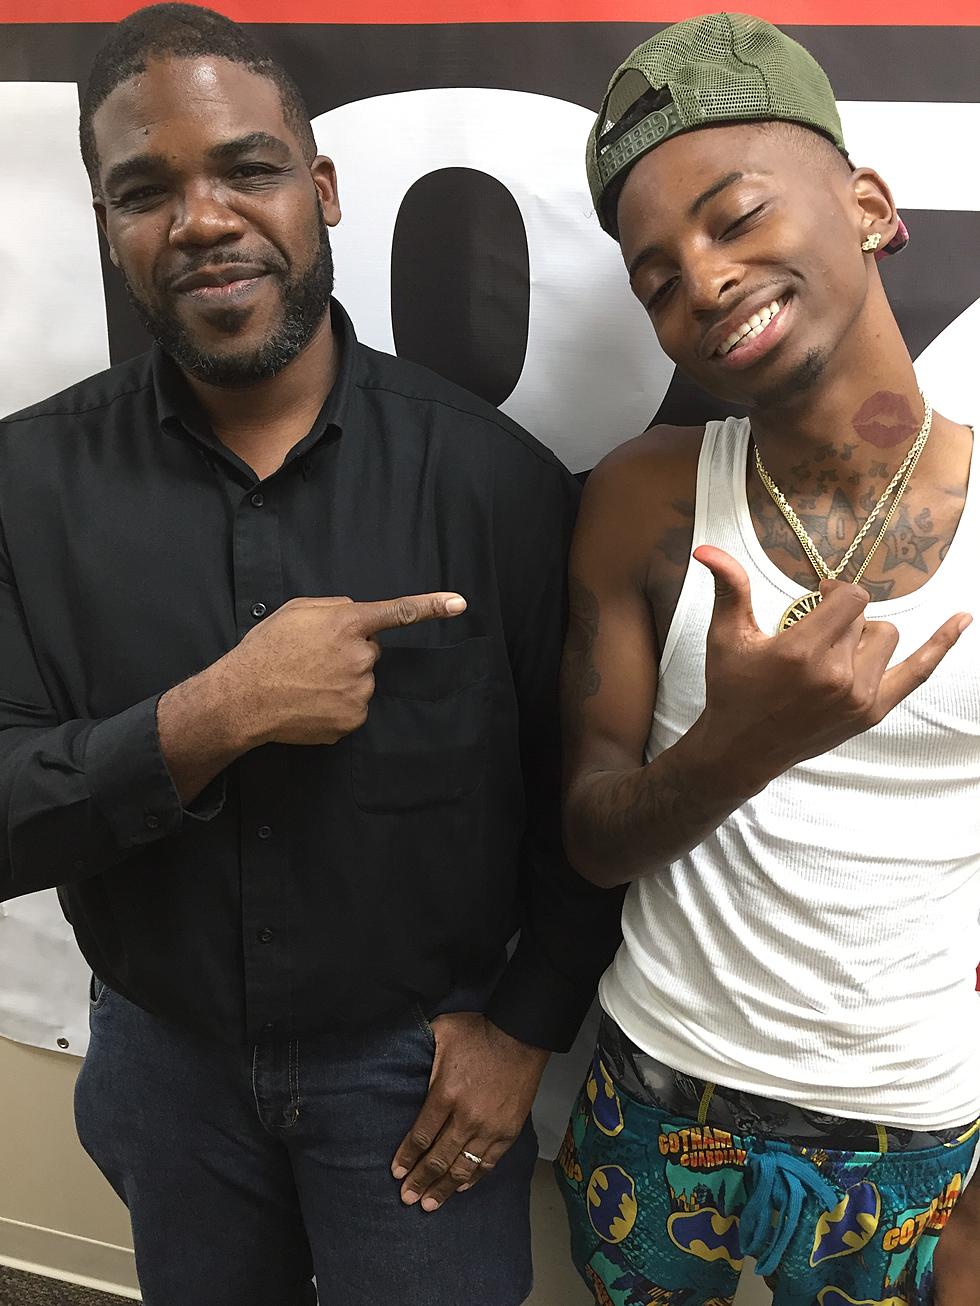 Baton Rouge Artist 22 Savage Discusses Beef Or No Beef With 21 Savage [NSFW, VIDEO]